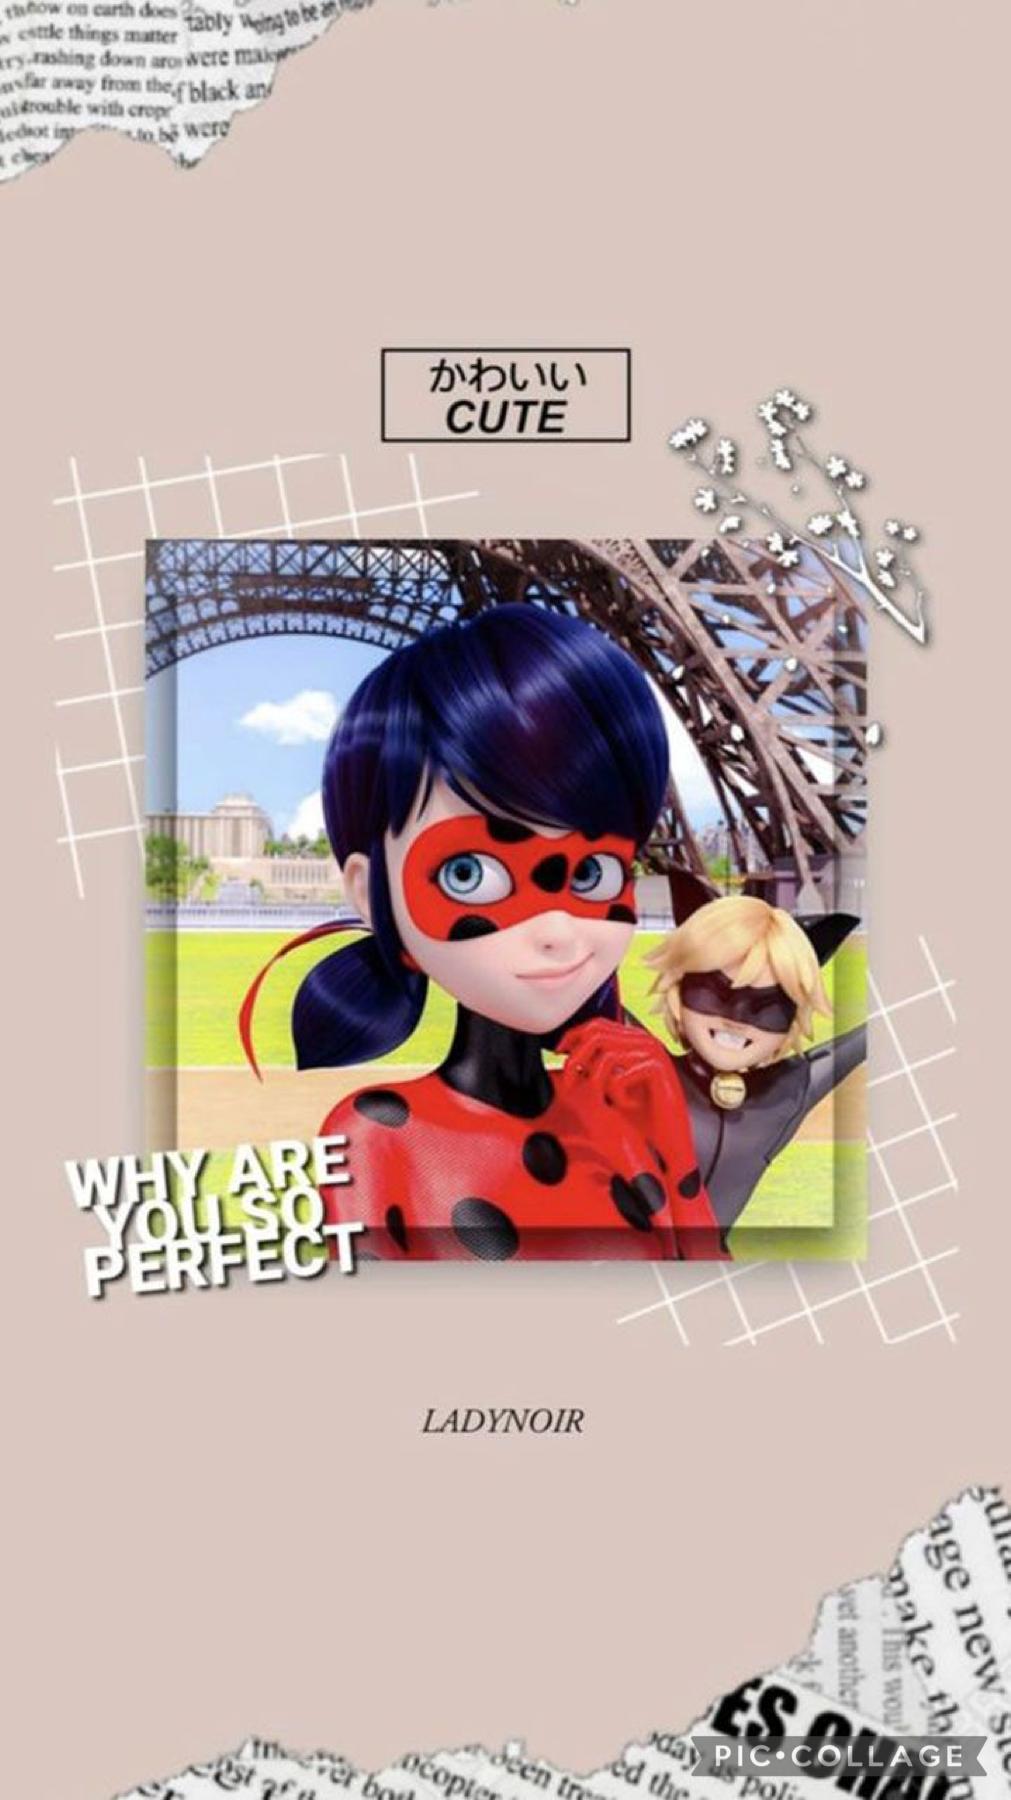 Collab with my bestie @miraculous_ladybug011! Go follow her rn she’s the best person on the planet 💕